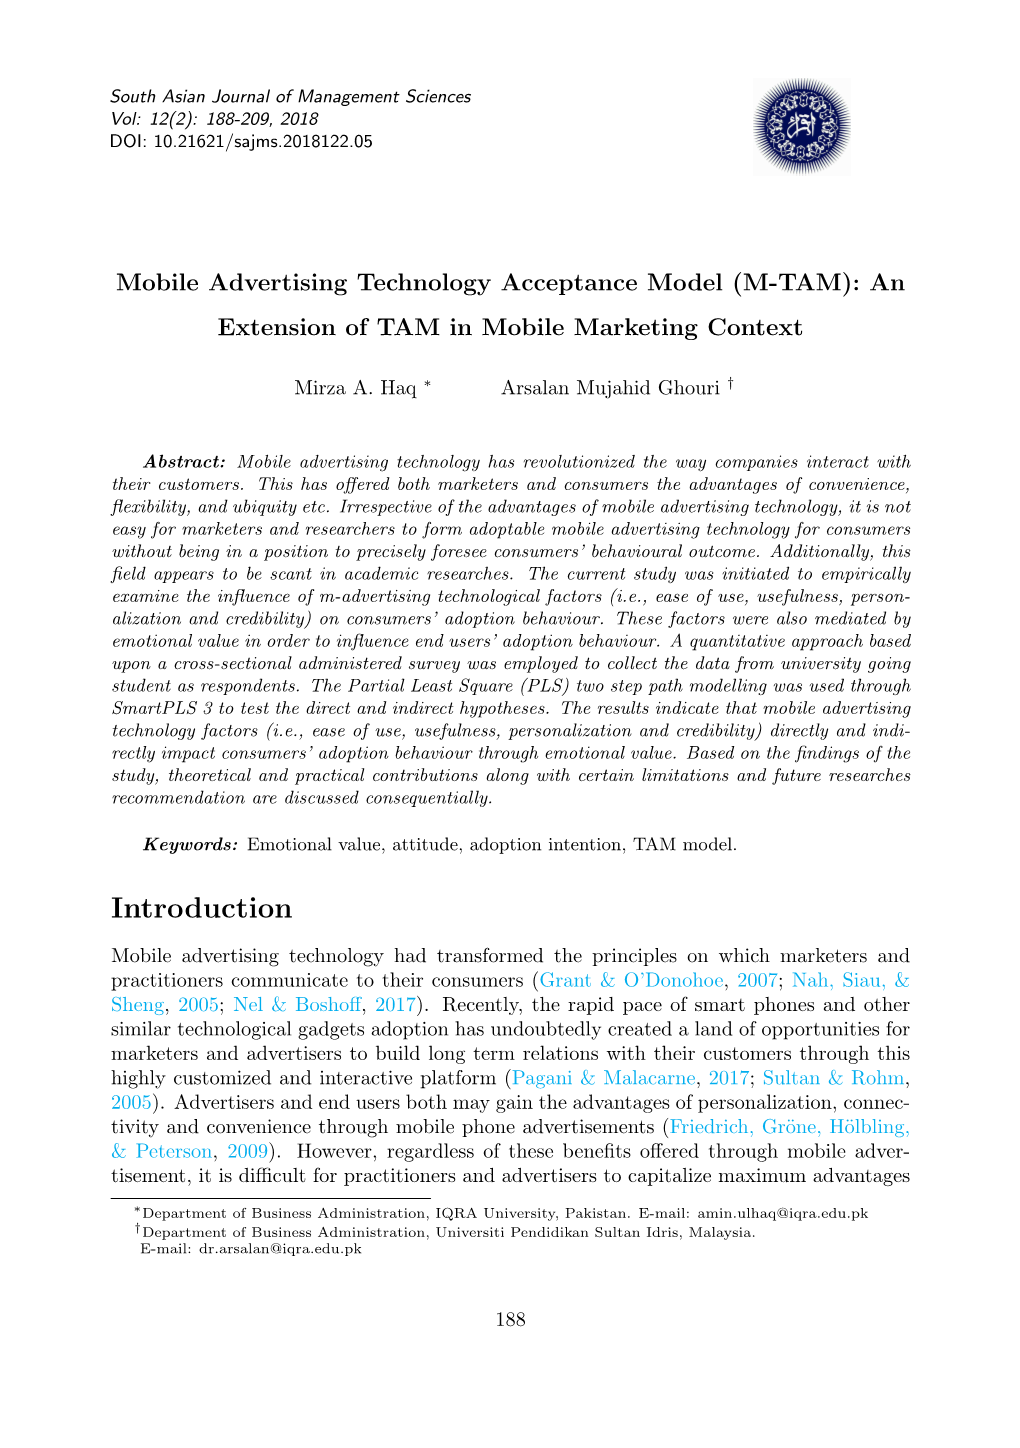 Mobile Advertising Technology Acceptance Model (M-TAM): an Extension of TAM in Mobile Marketing Context